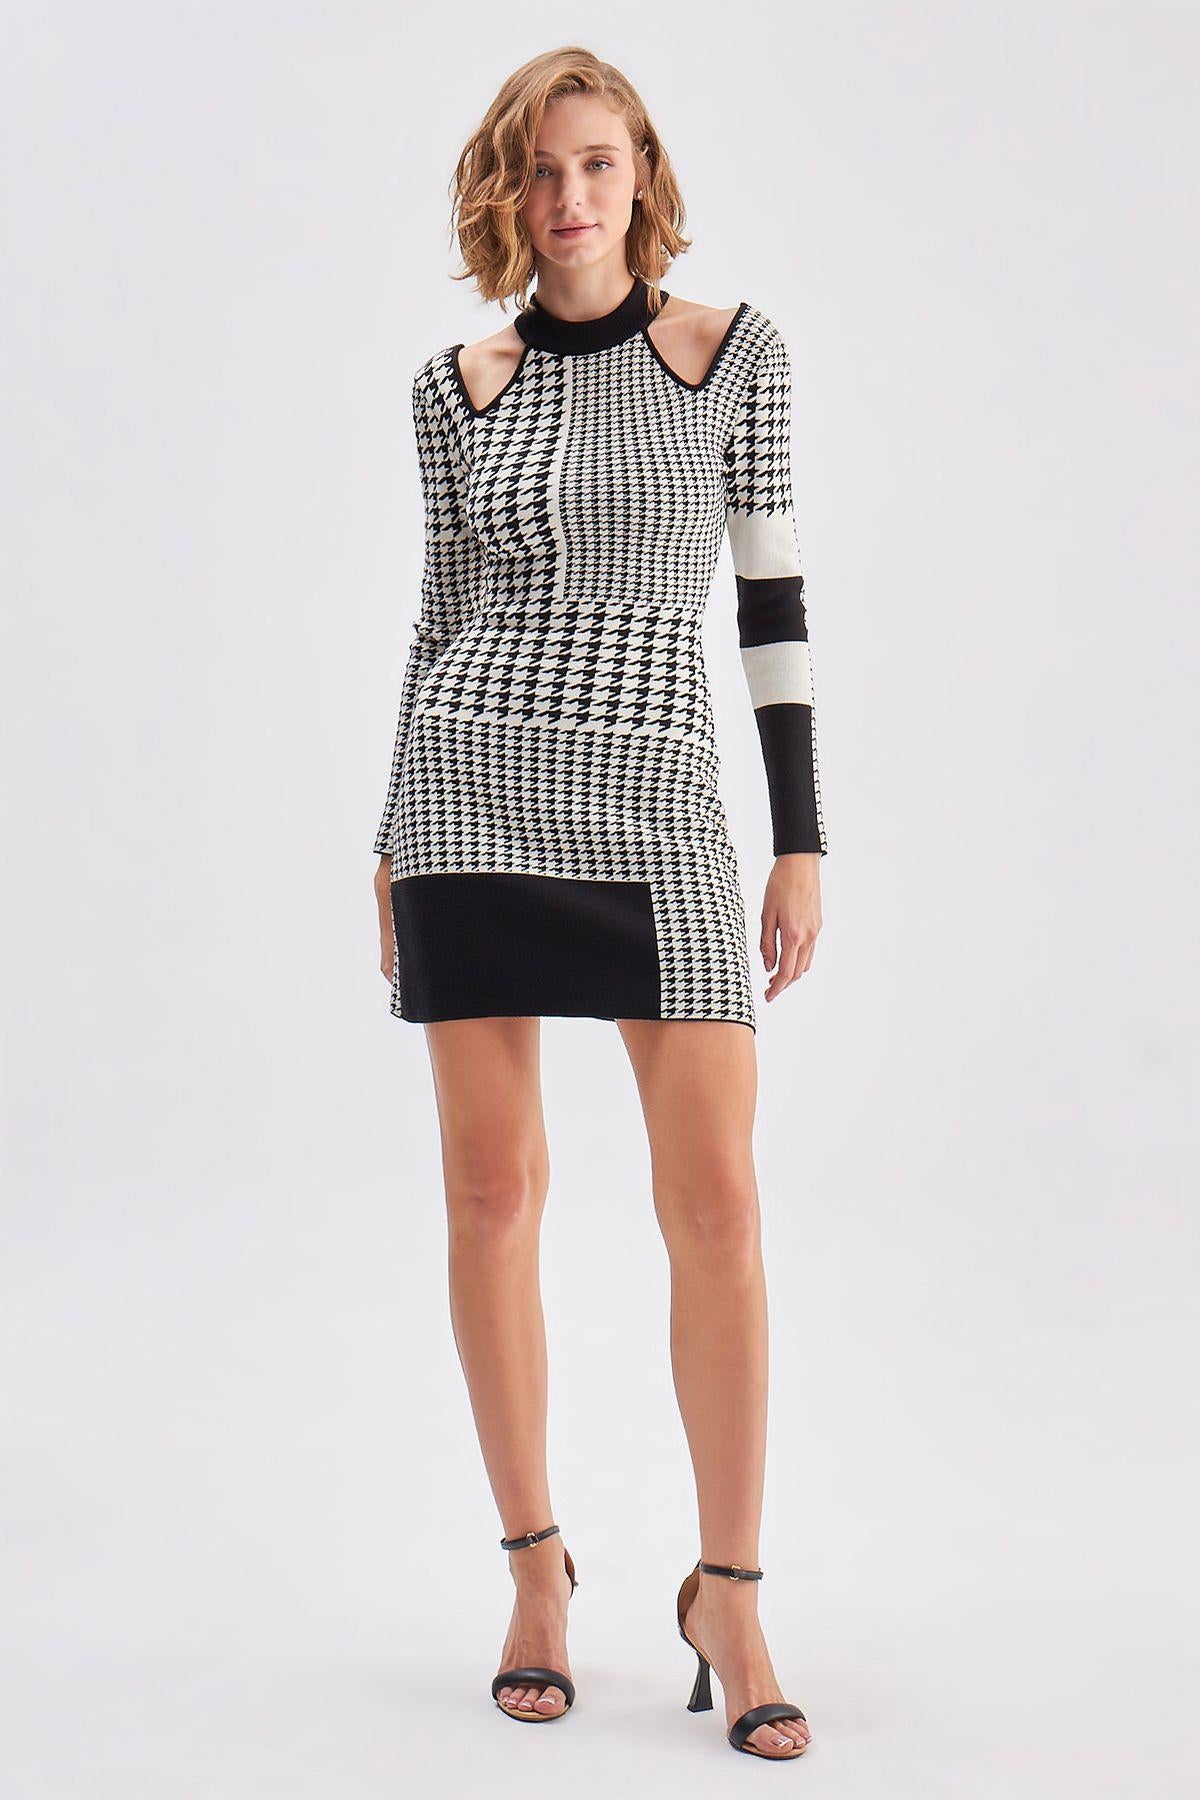 Black and White Patterned Cut Out Knitwear Dress